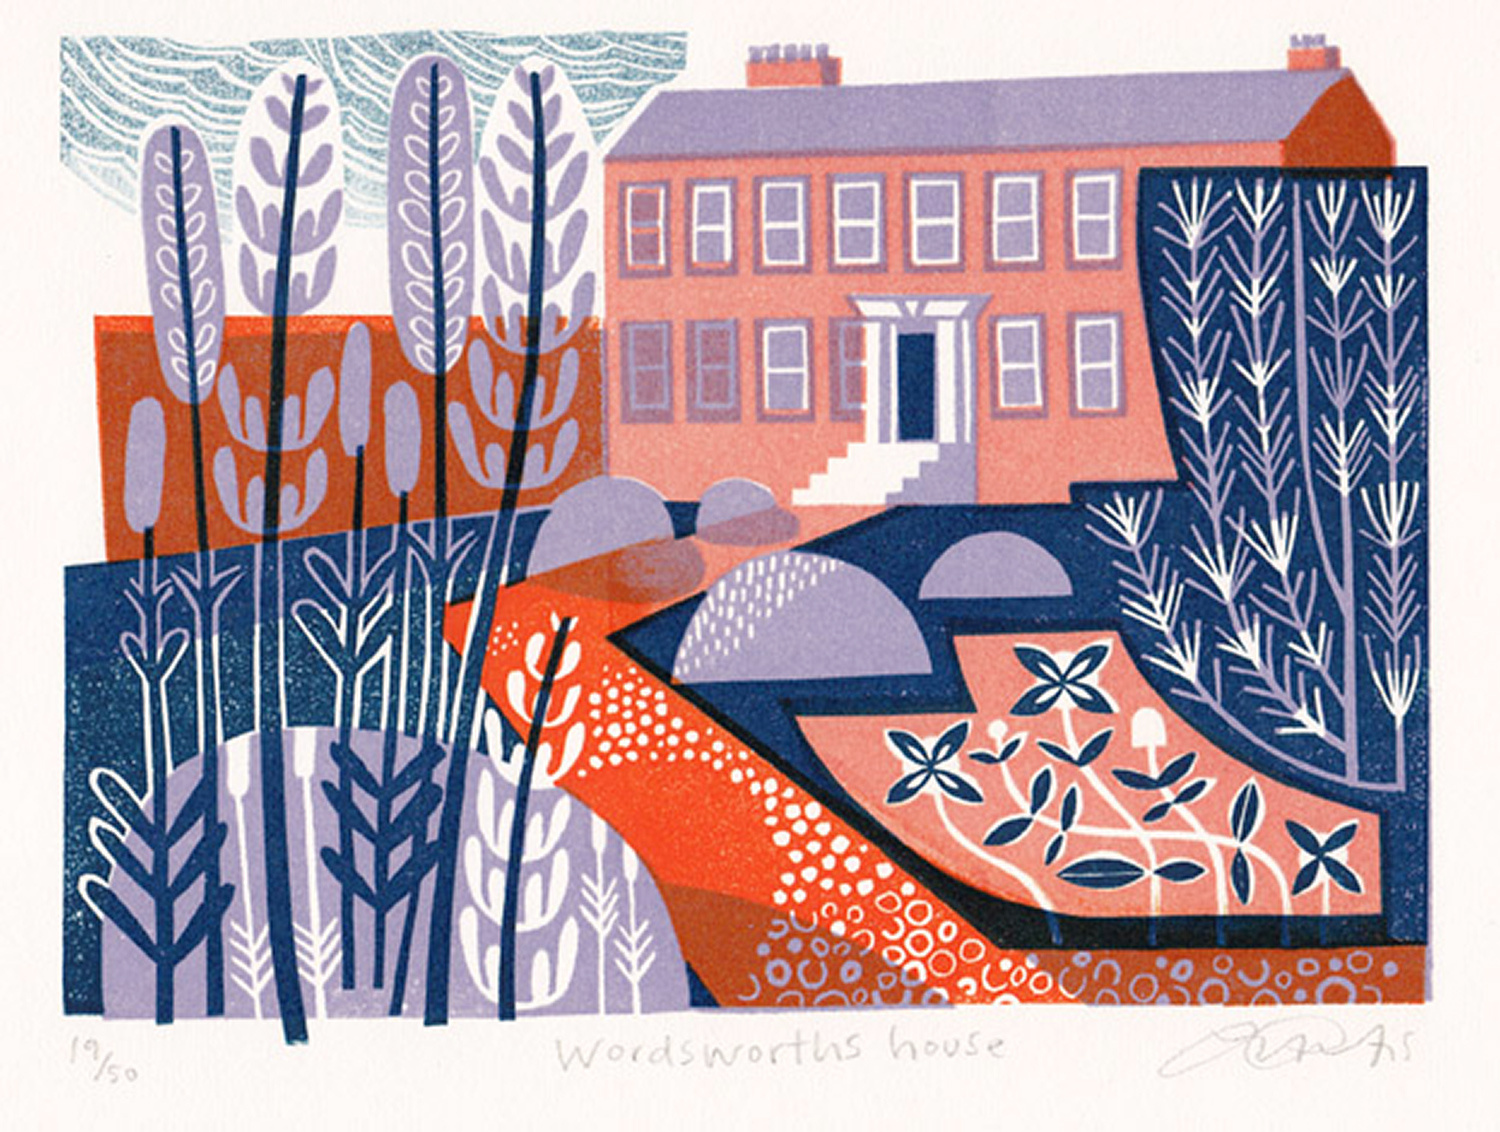 Wordsworth's House by Clare Curtis